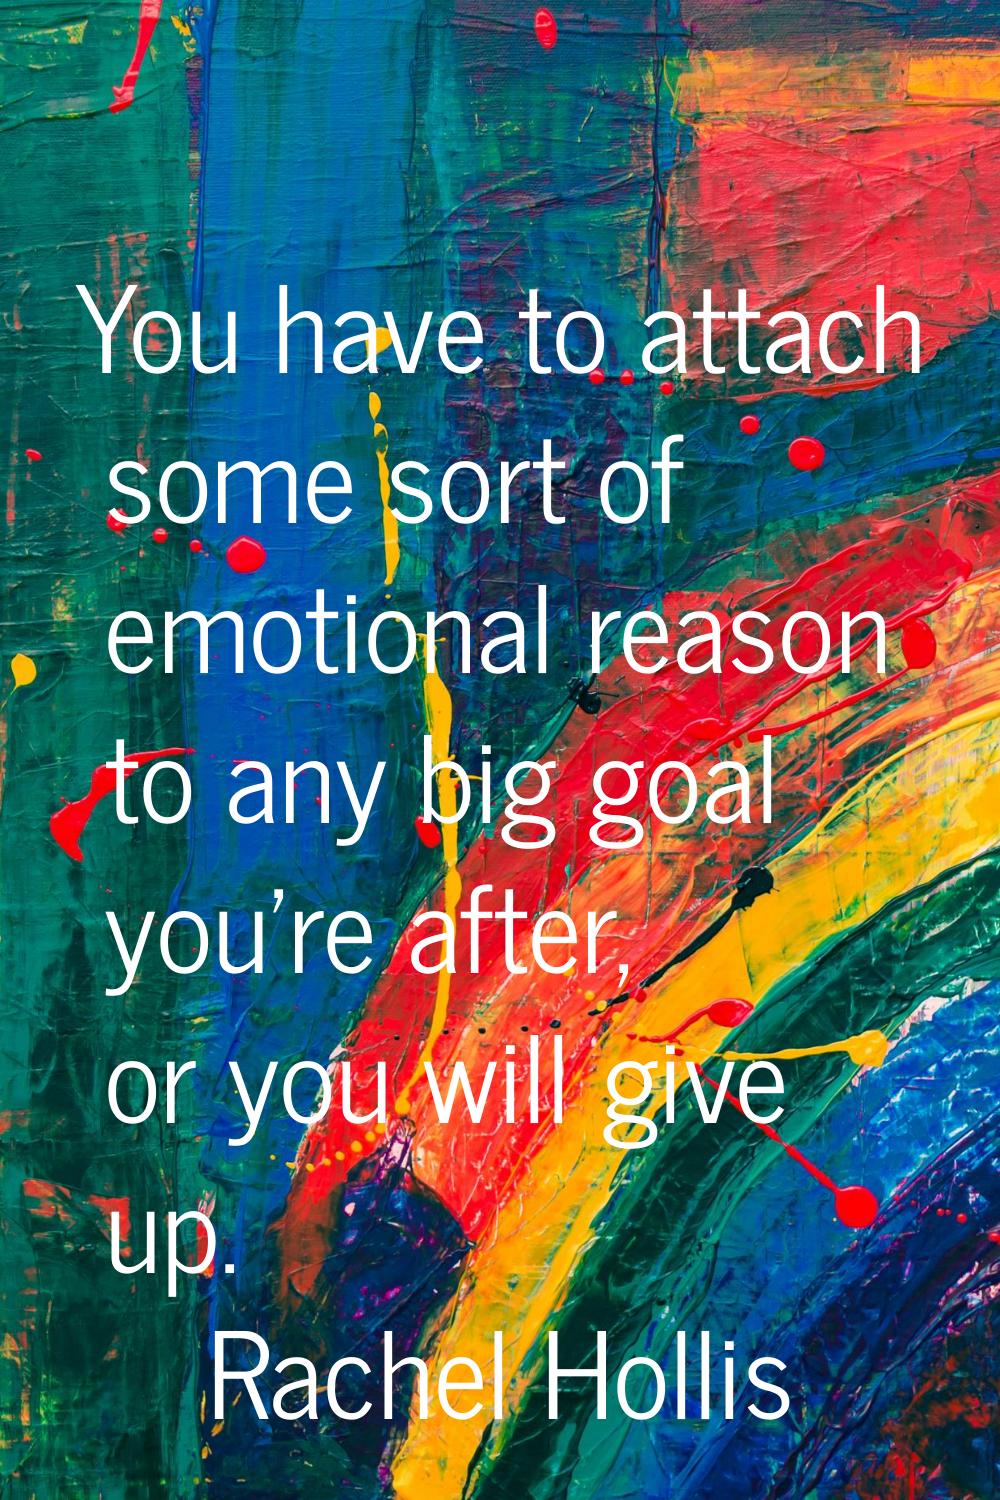 You have to attach some sort of emotional reason to any big goal you're after, or you will give up.